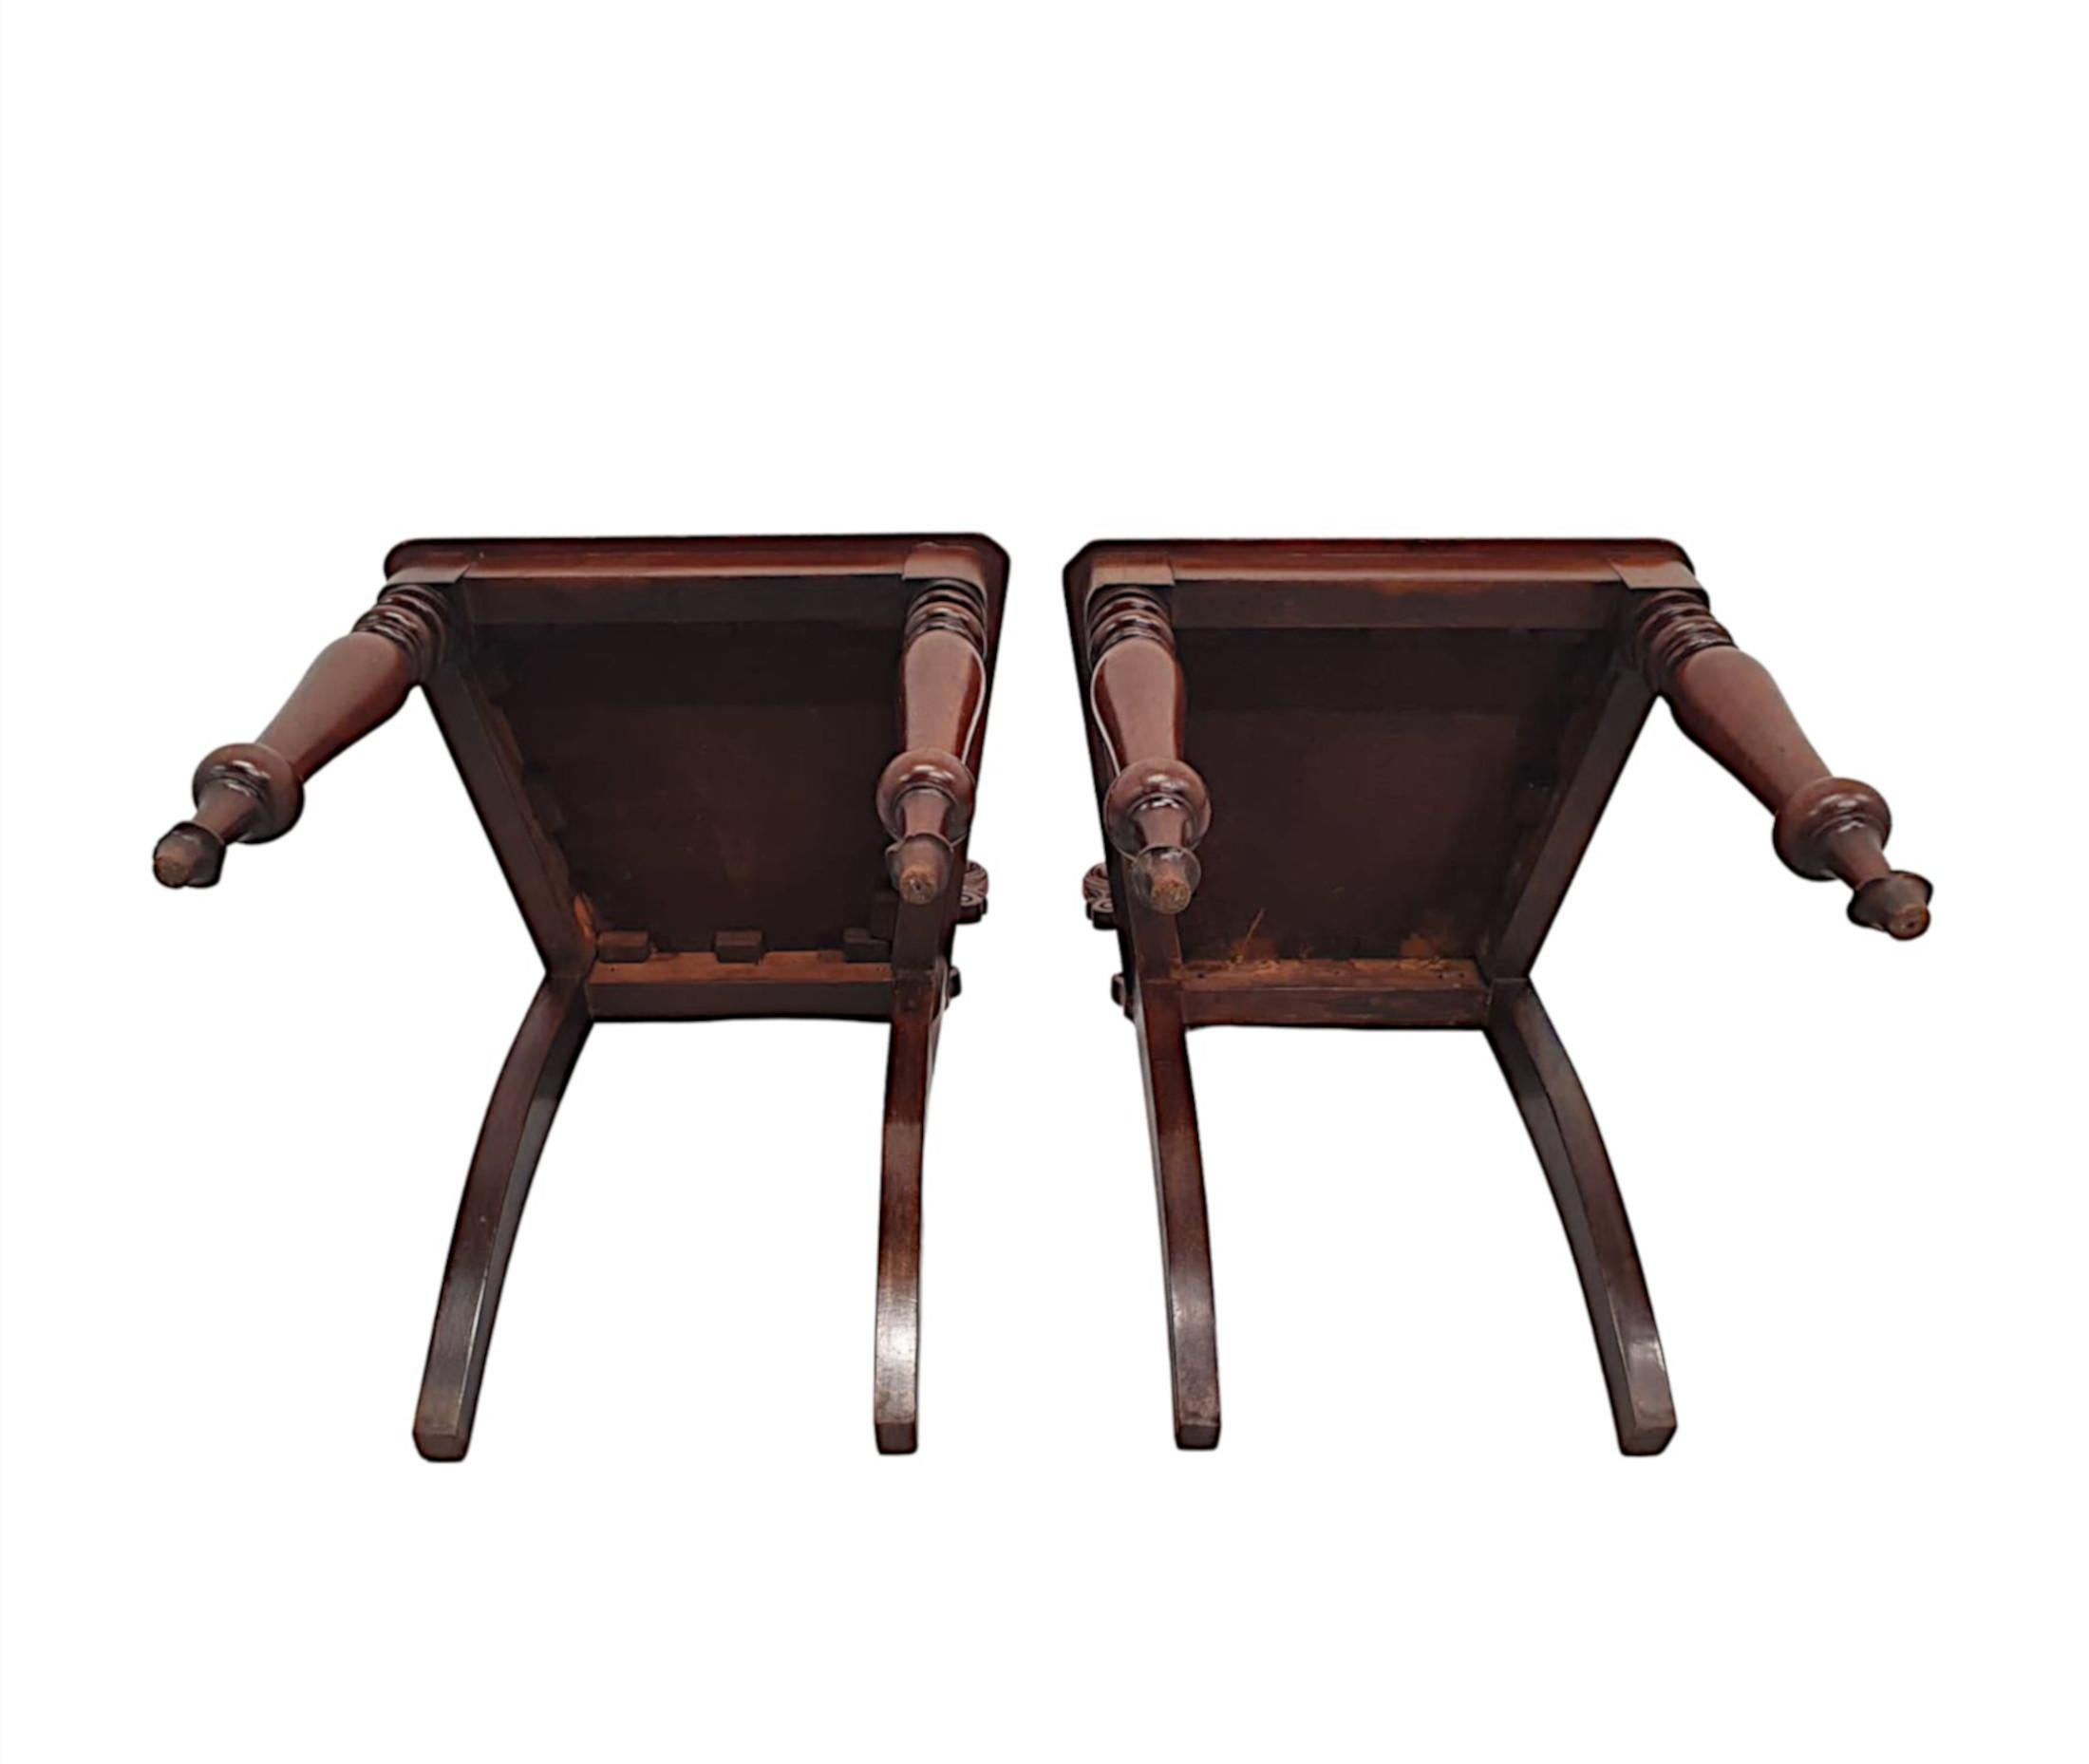 Mahogany A Very Fine Pair of 19th Century Hall Chairs For Sale